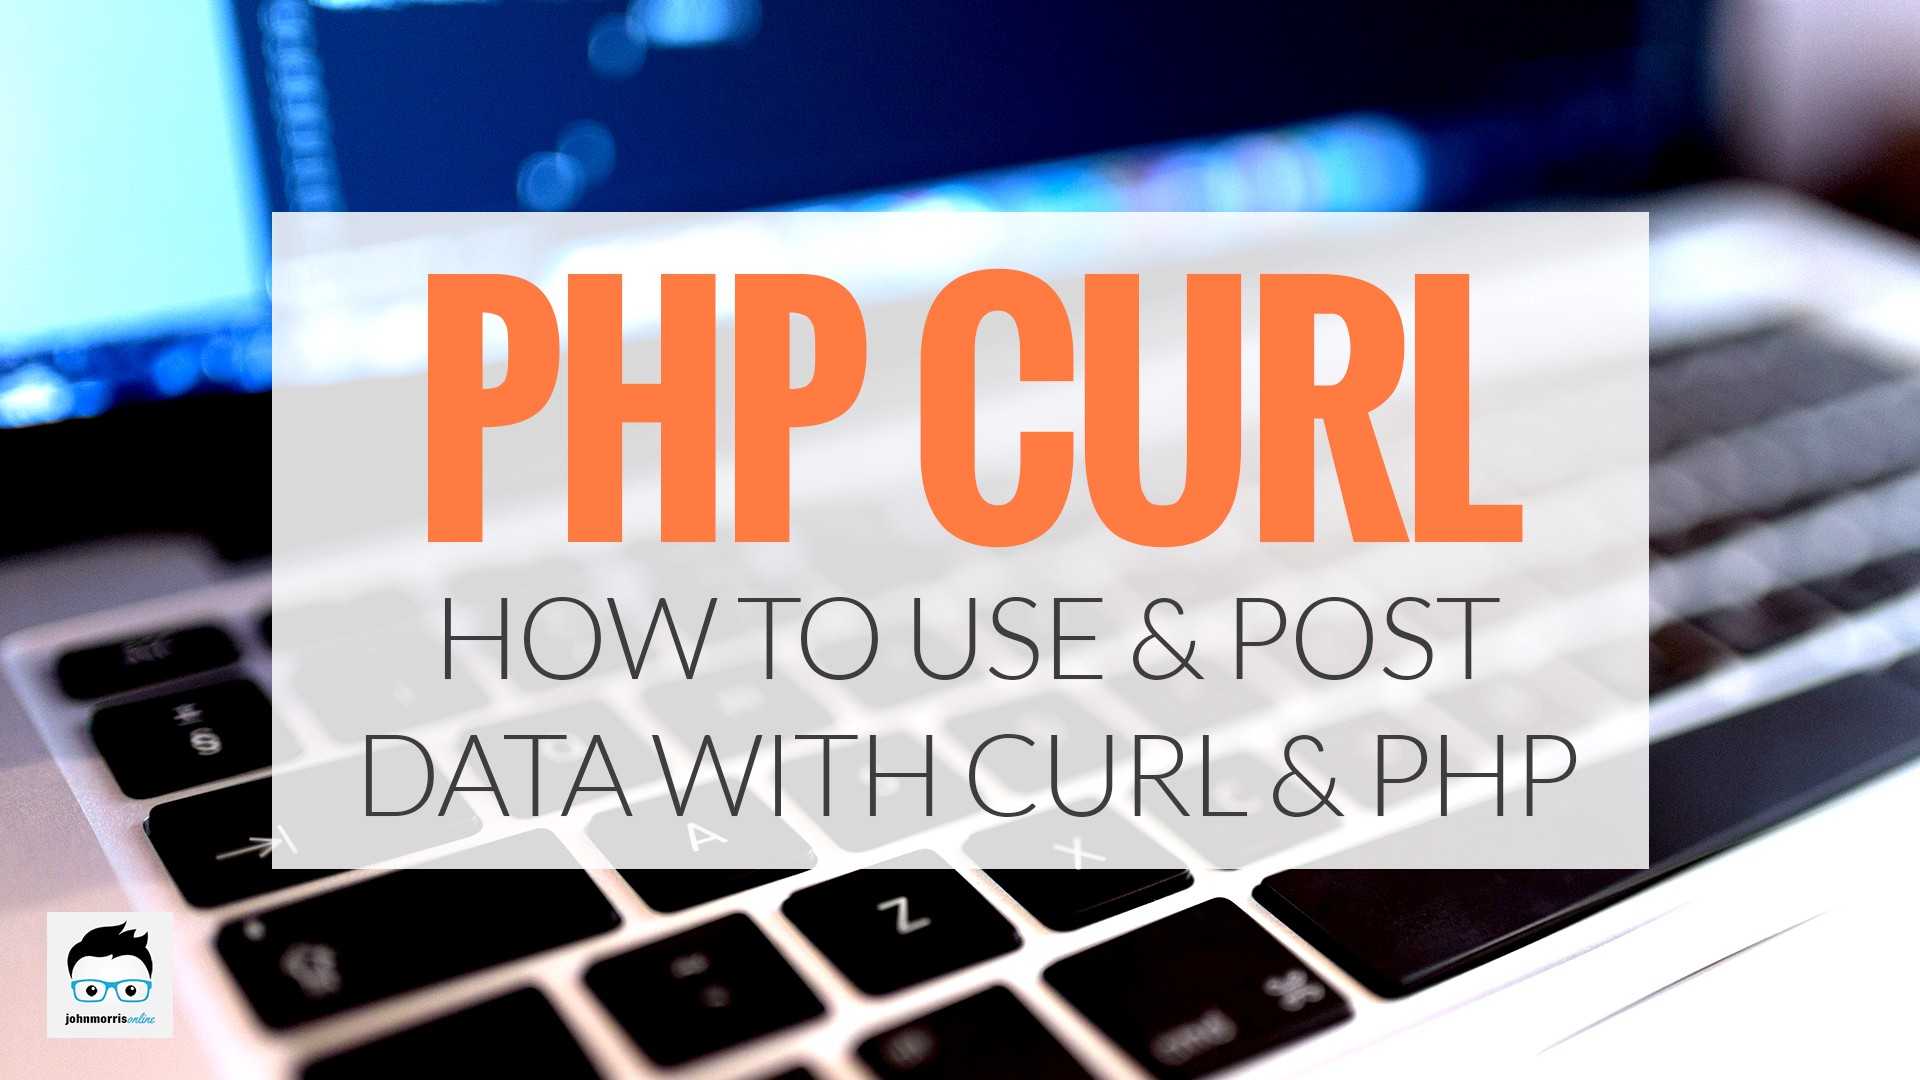 Curl php. Curlsbot. Php curl get